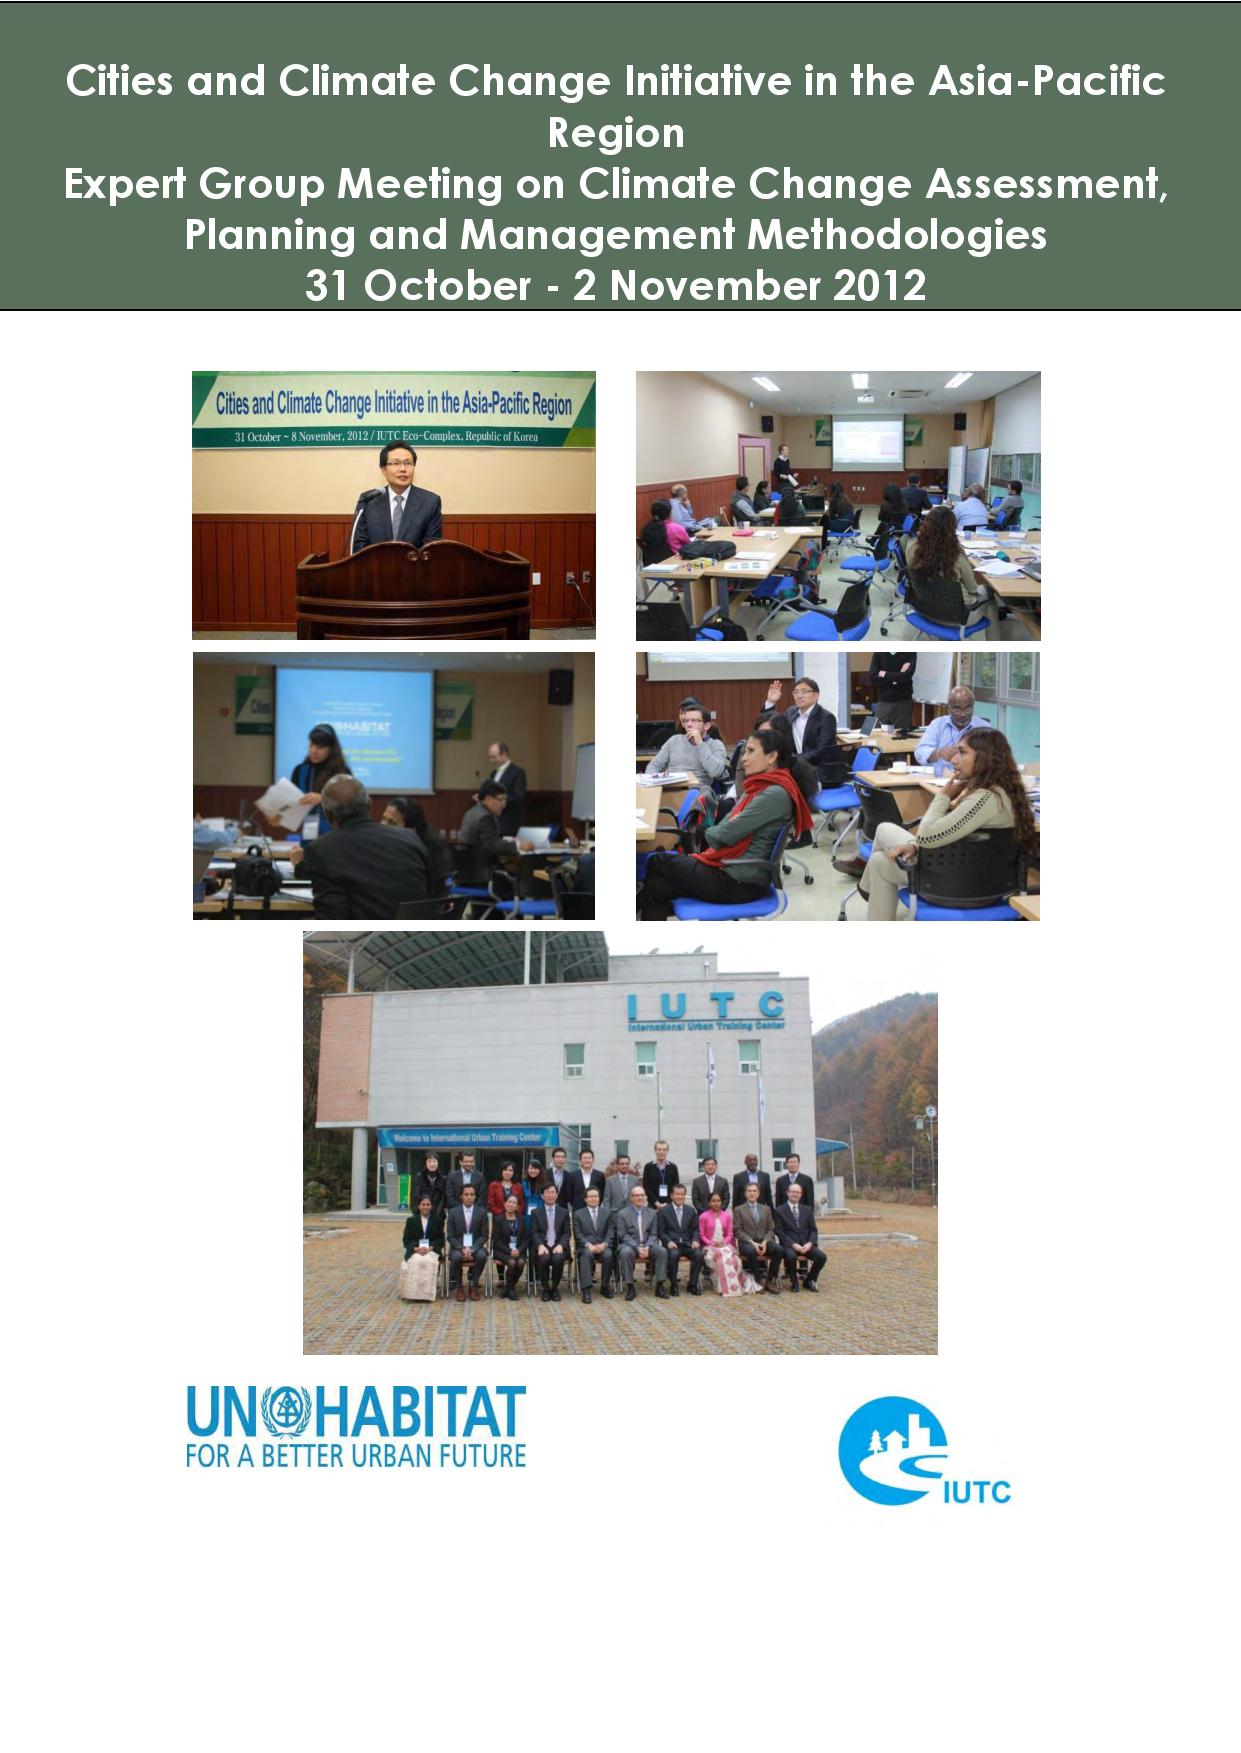 Expert Group Meeting on Climate Change Assessment, Planning and Management Methodologies (Hongcheon, Republic of Korea: 31 October – 2 November 2012) – CCCI